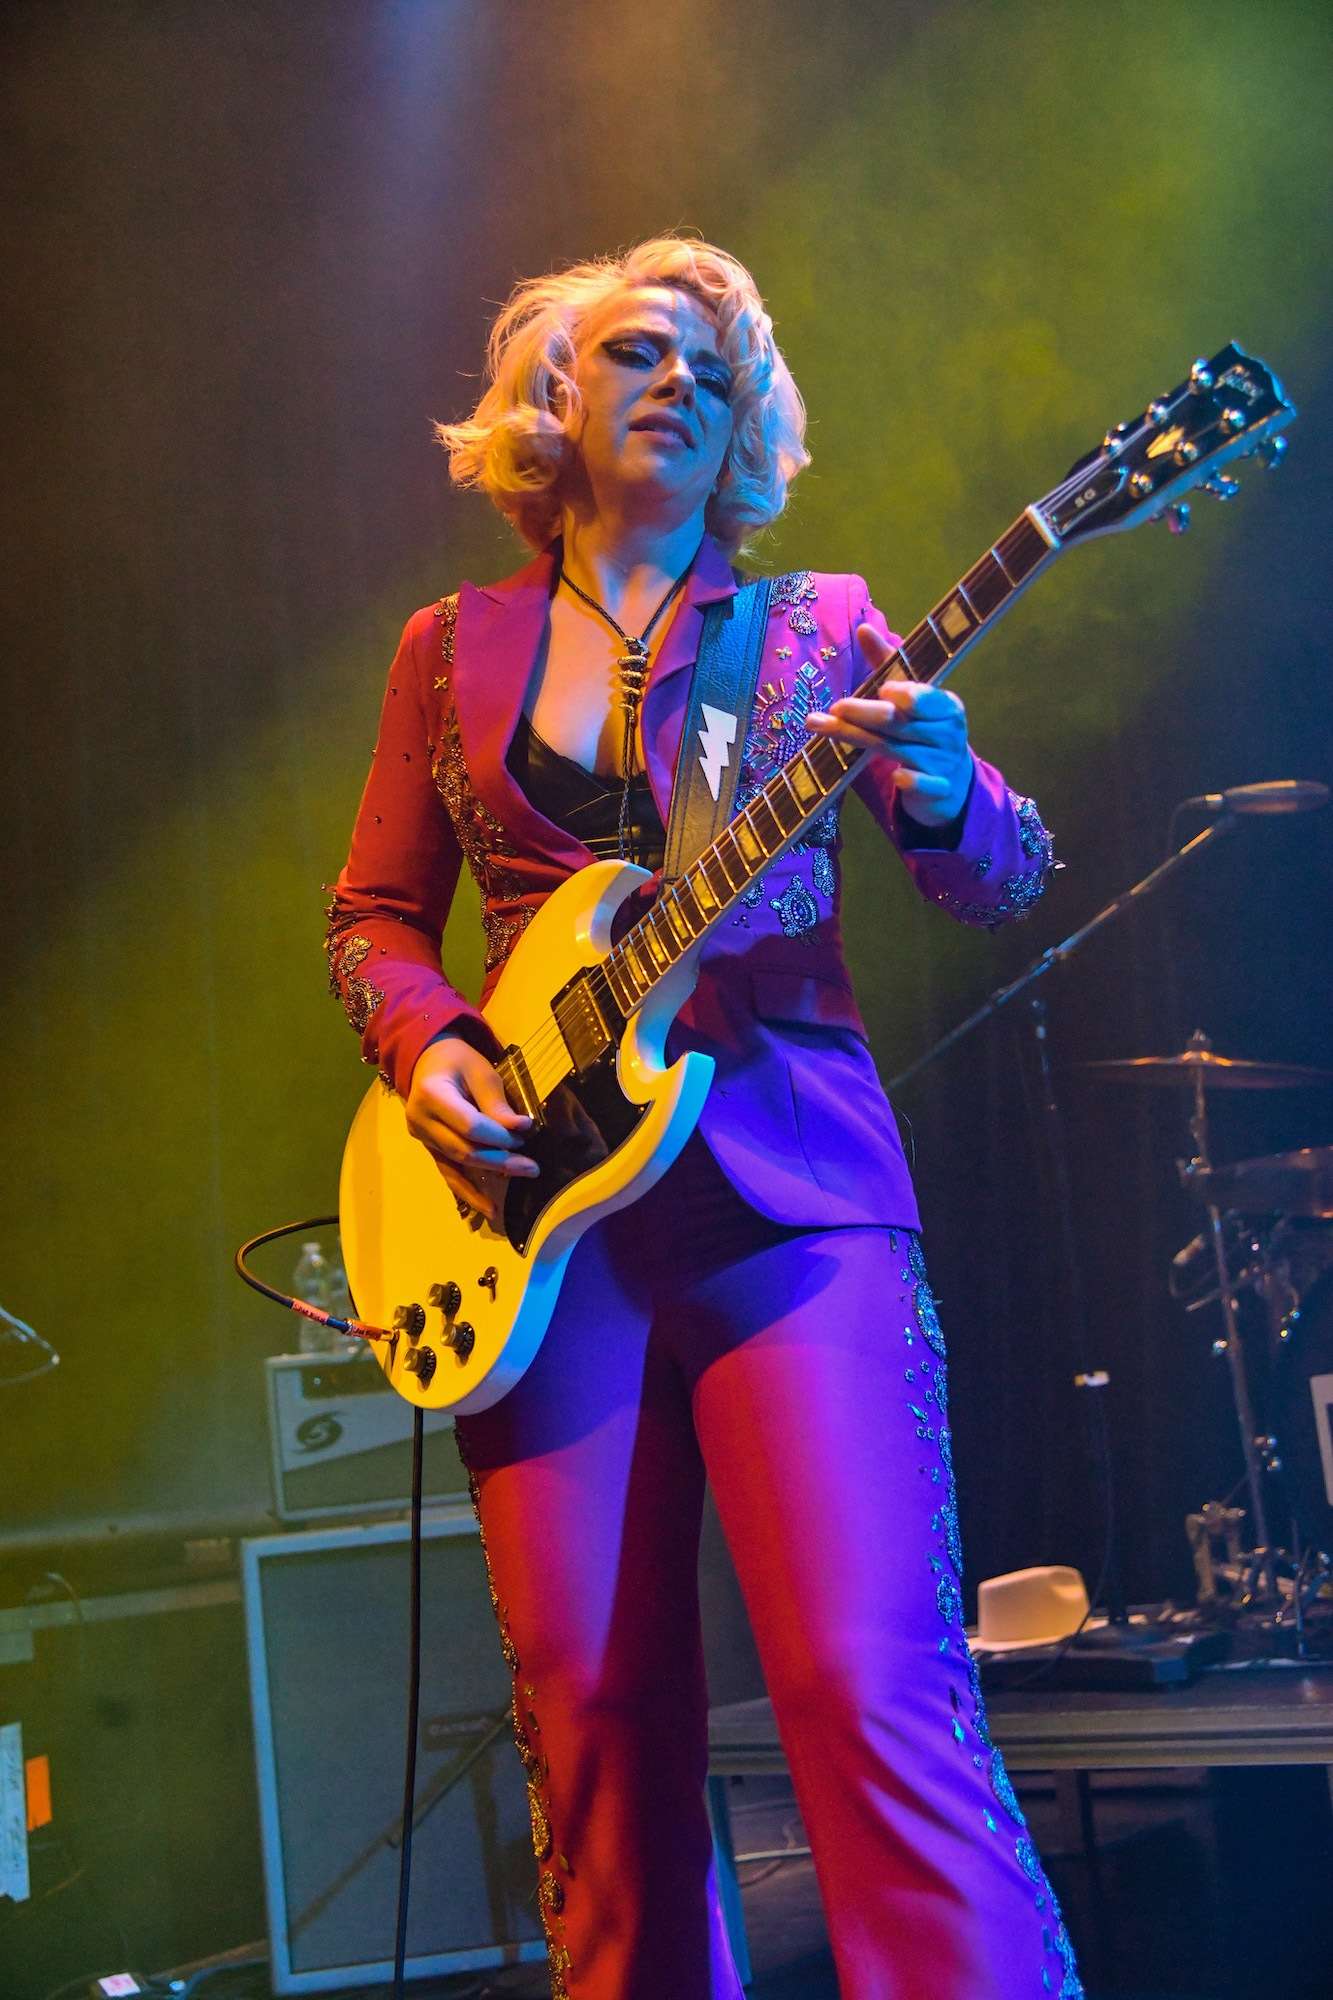 Samantha Fish Live at Park West [GALLERY] 4